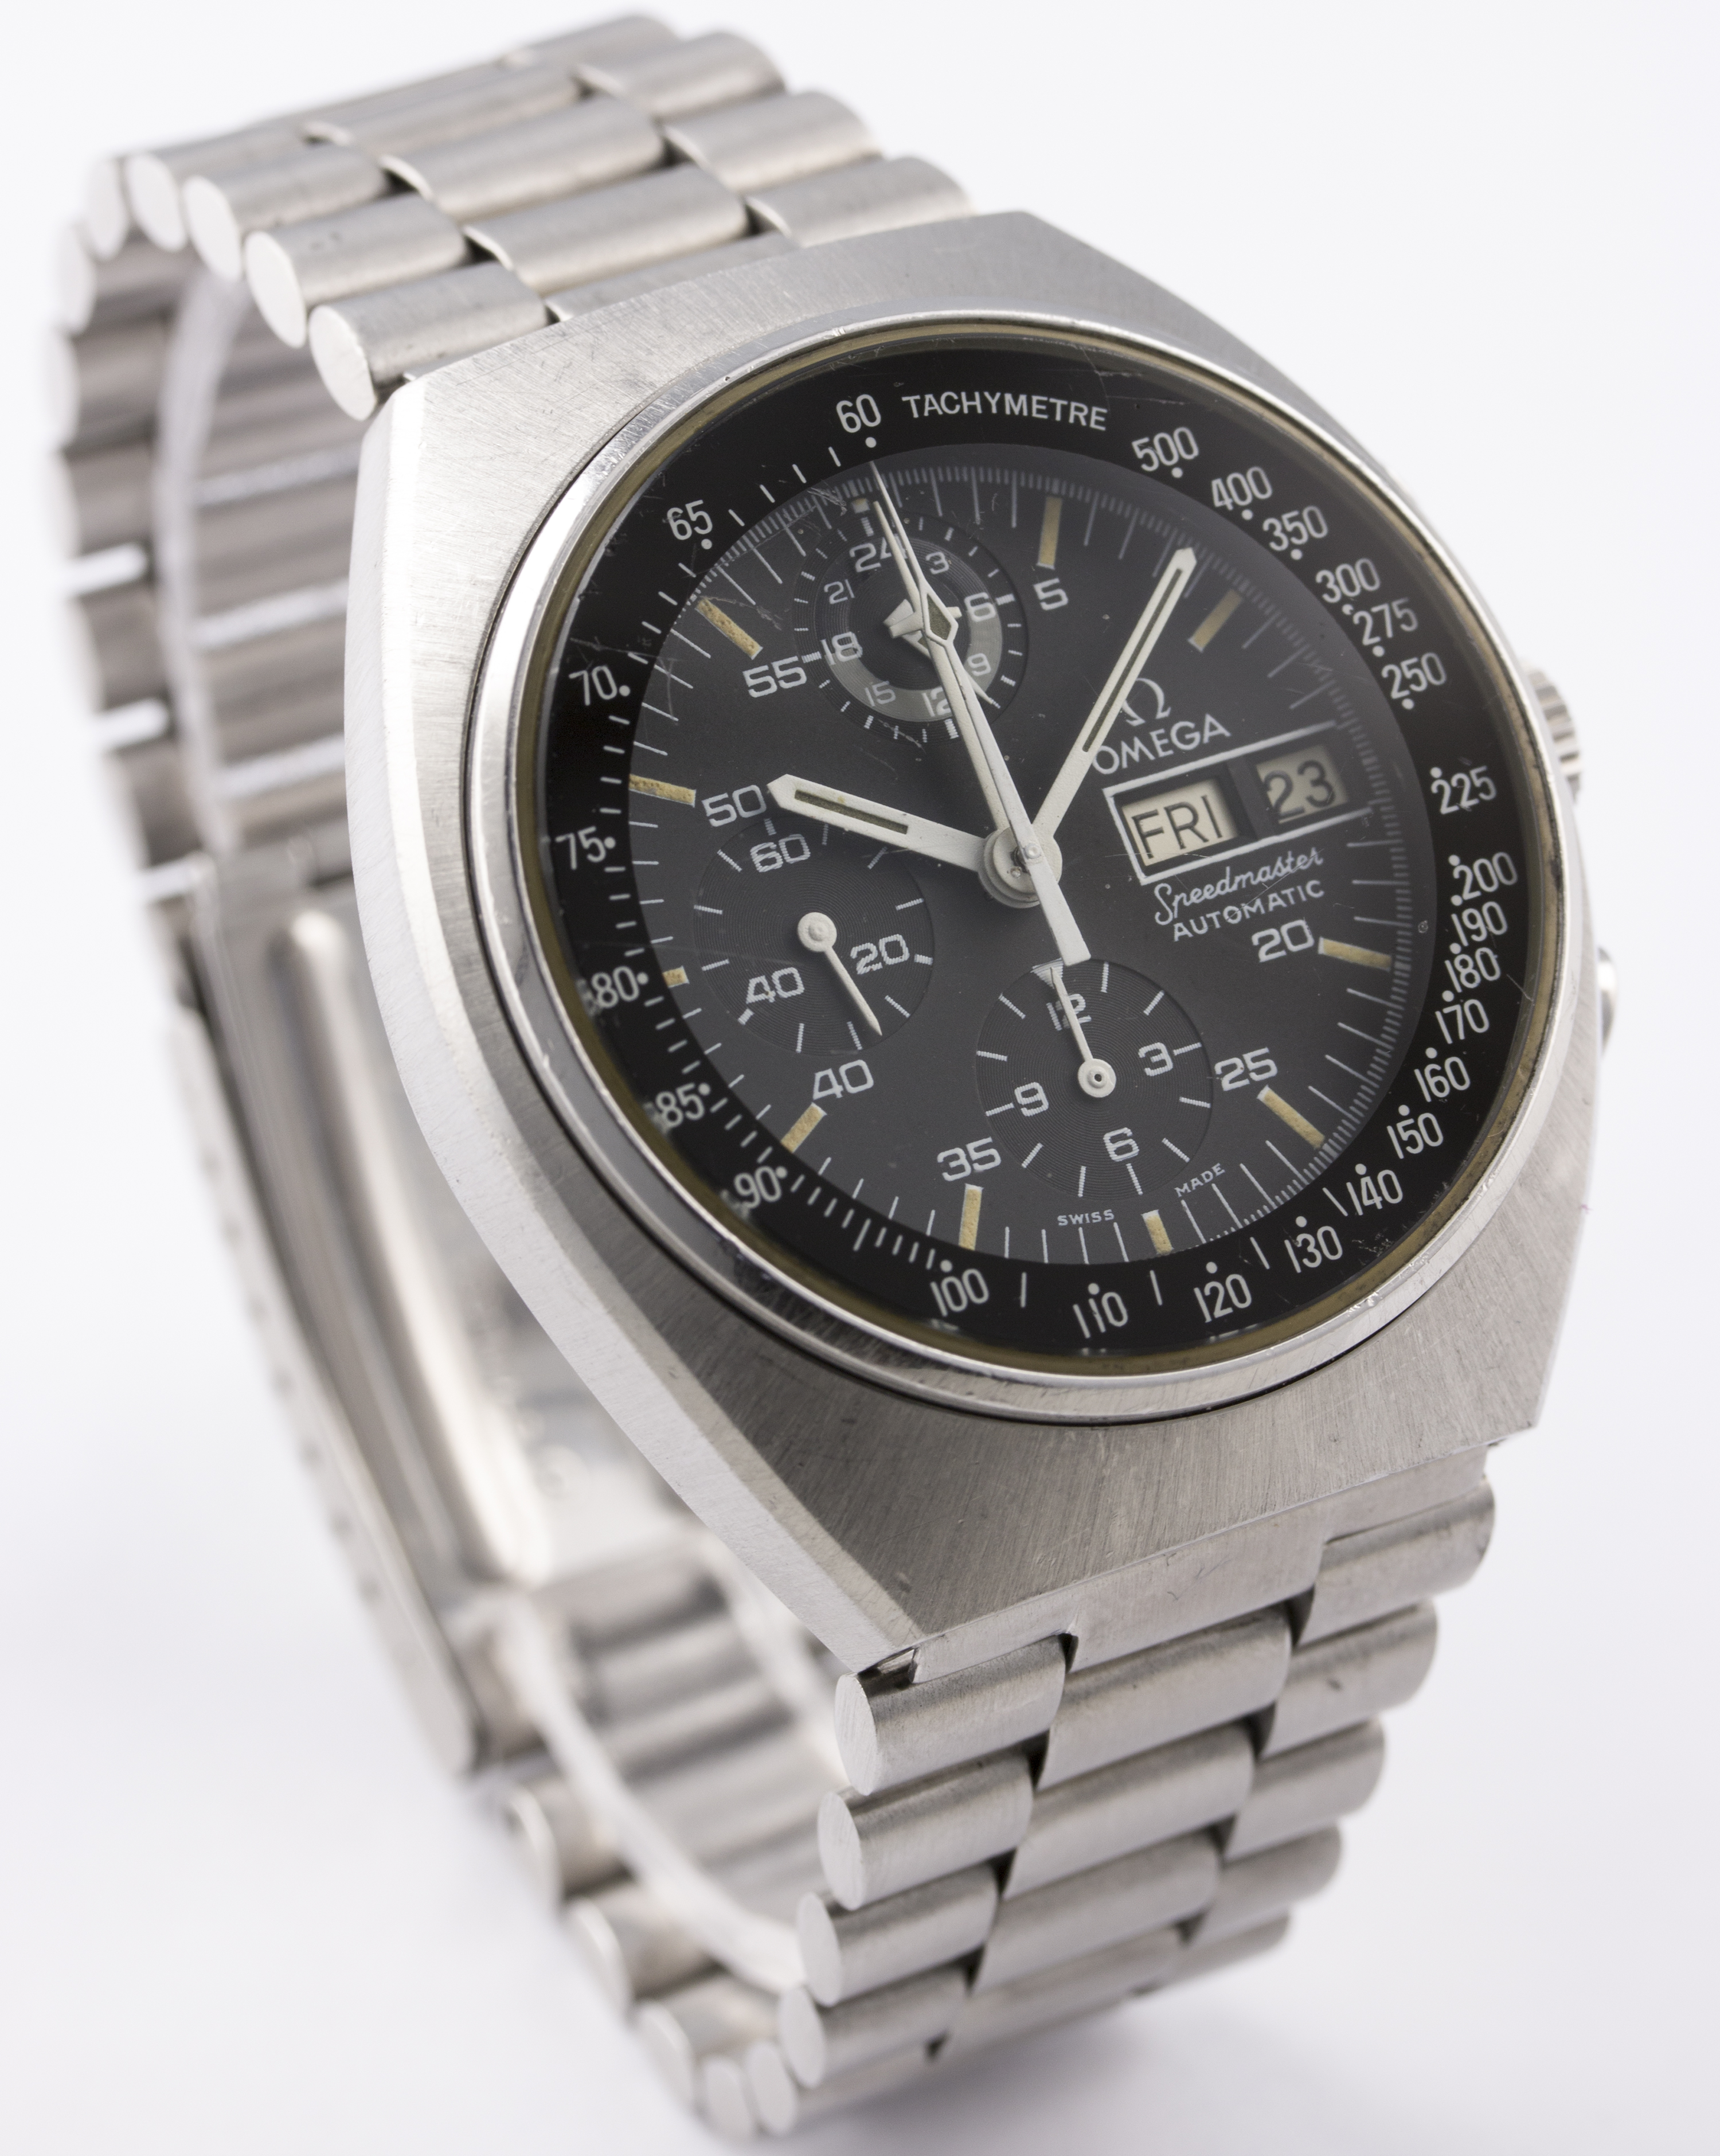 A GENTLEMAN'S STAINLESS STEEL OMEGA SPEEDMASTER MARK 4.5 AUTOMATIC CHRONOGRAPH BRACELET WATCH - Image 5 of 9